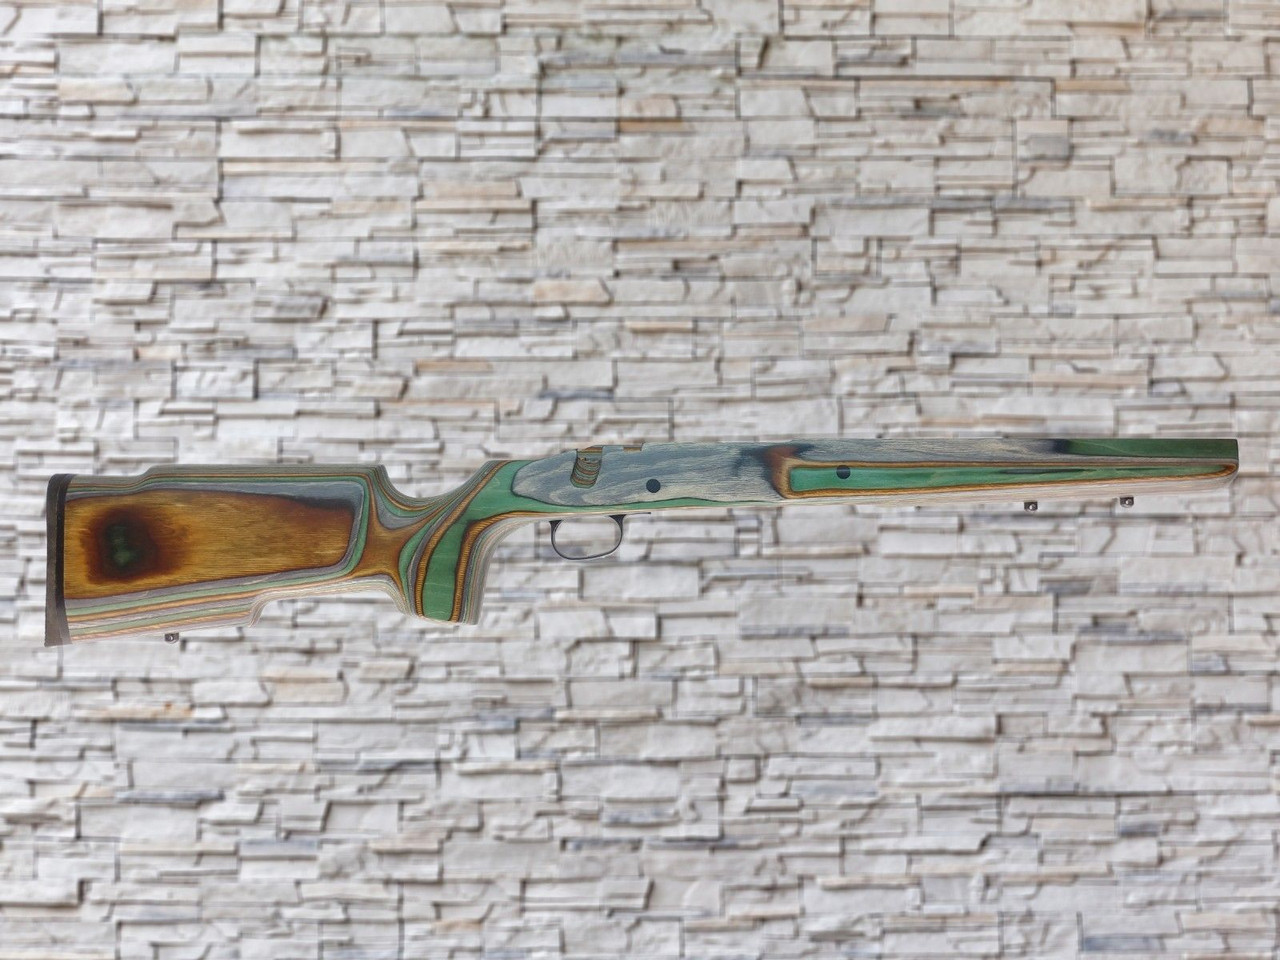 Boyds Pro Varmint Camo Stock Savage AXIS Short Action Tapered Barrel Rifle